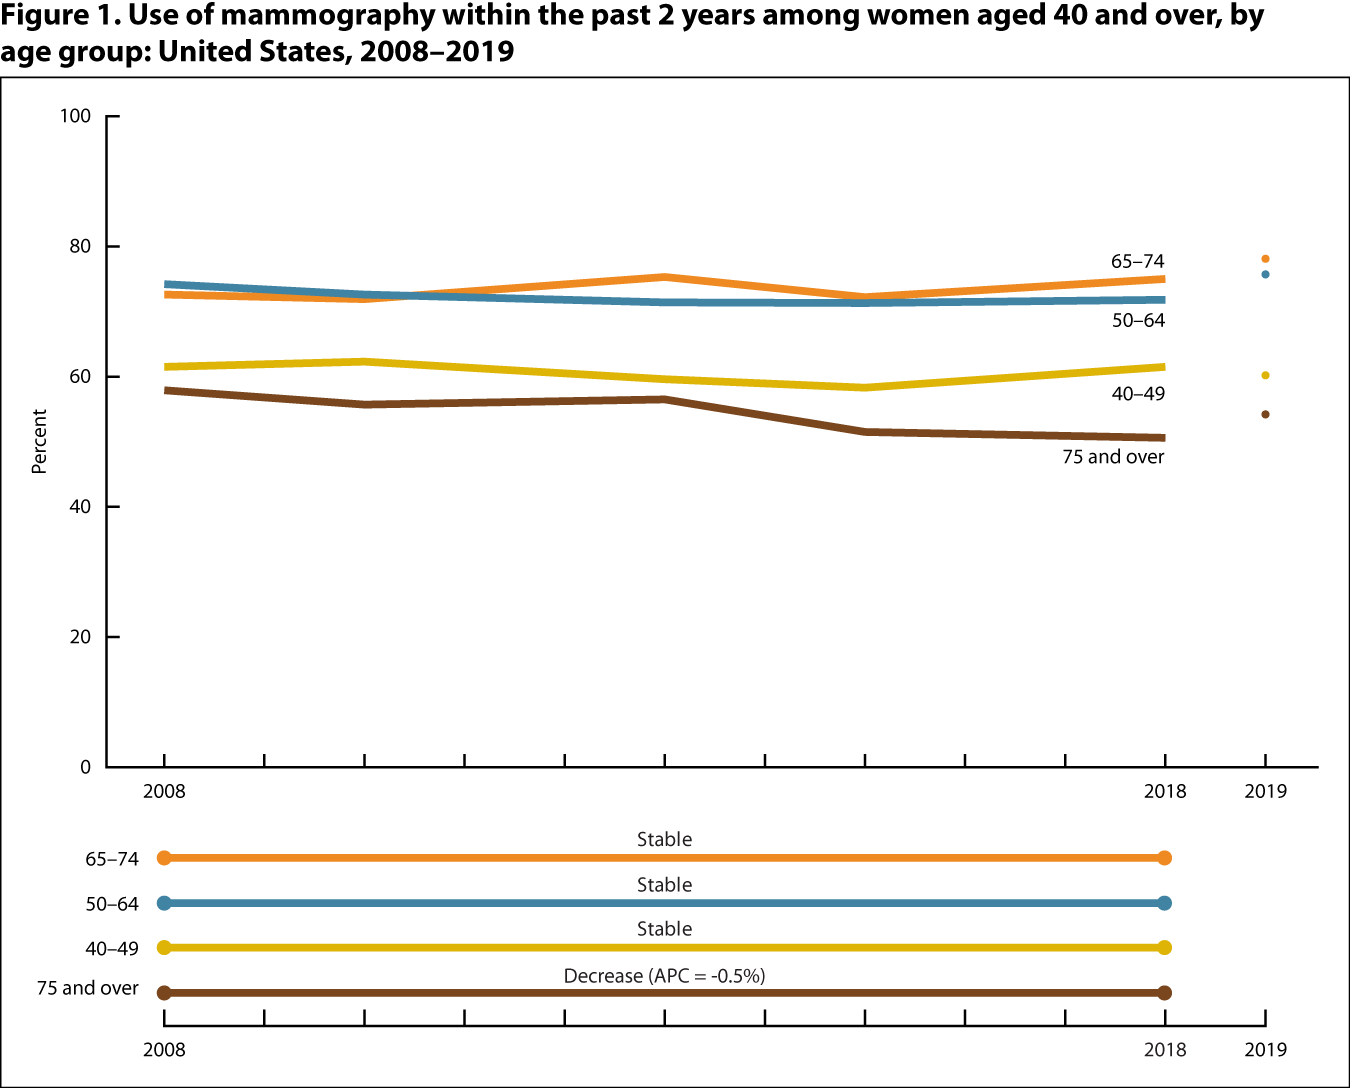 Figure 1 is a line graph showing the percentage of women aged 40 and over who self-reported  mammogram use within the past 2 years, by age group for 2008 through 2018 (line) and at 2019 (point).